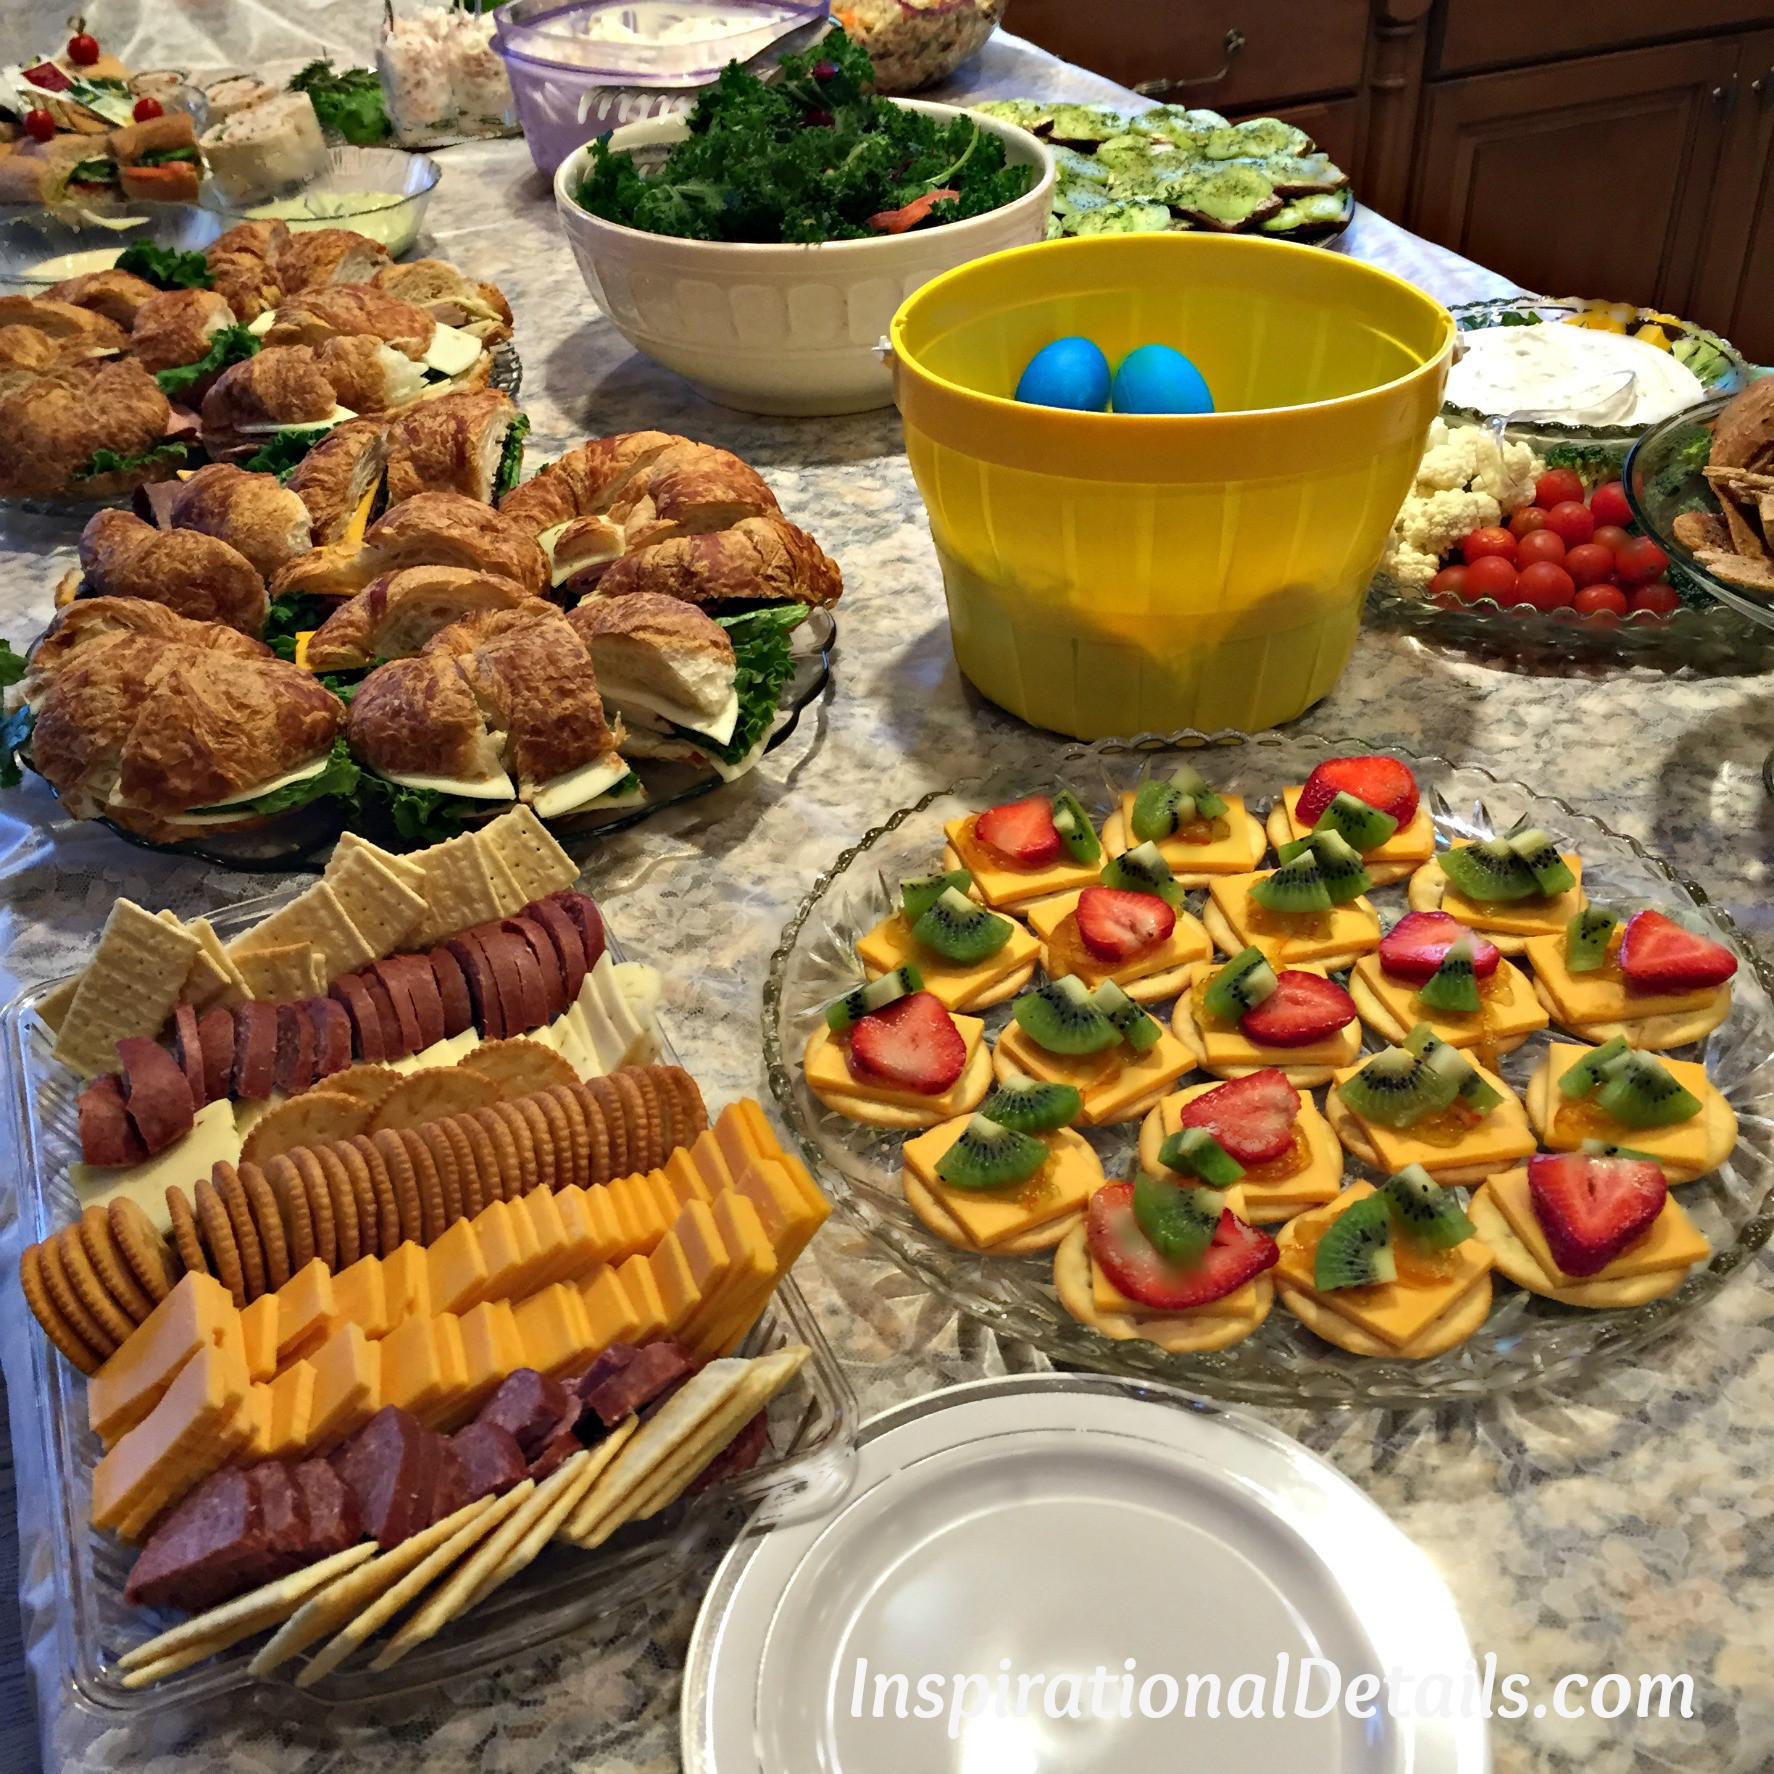 Aengagement Party Food Ideas
 “Love is in the Air” Bridal Shower